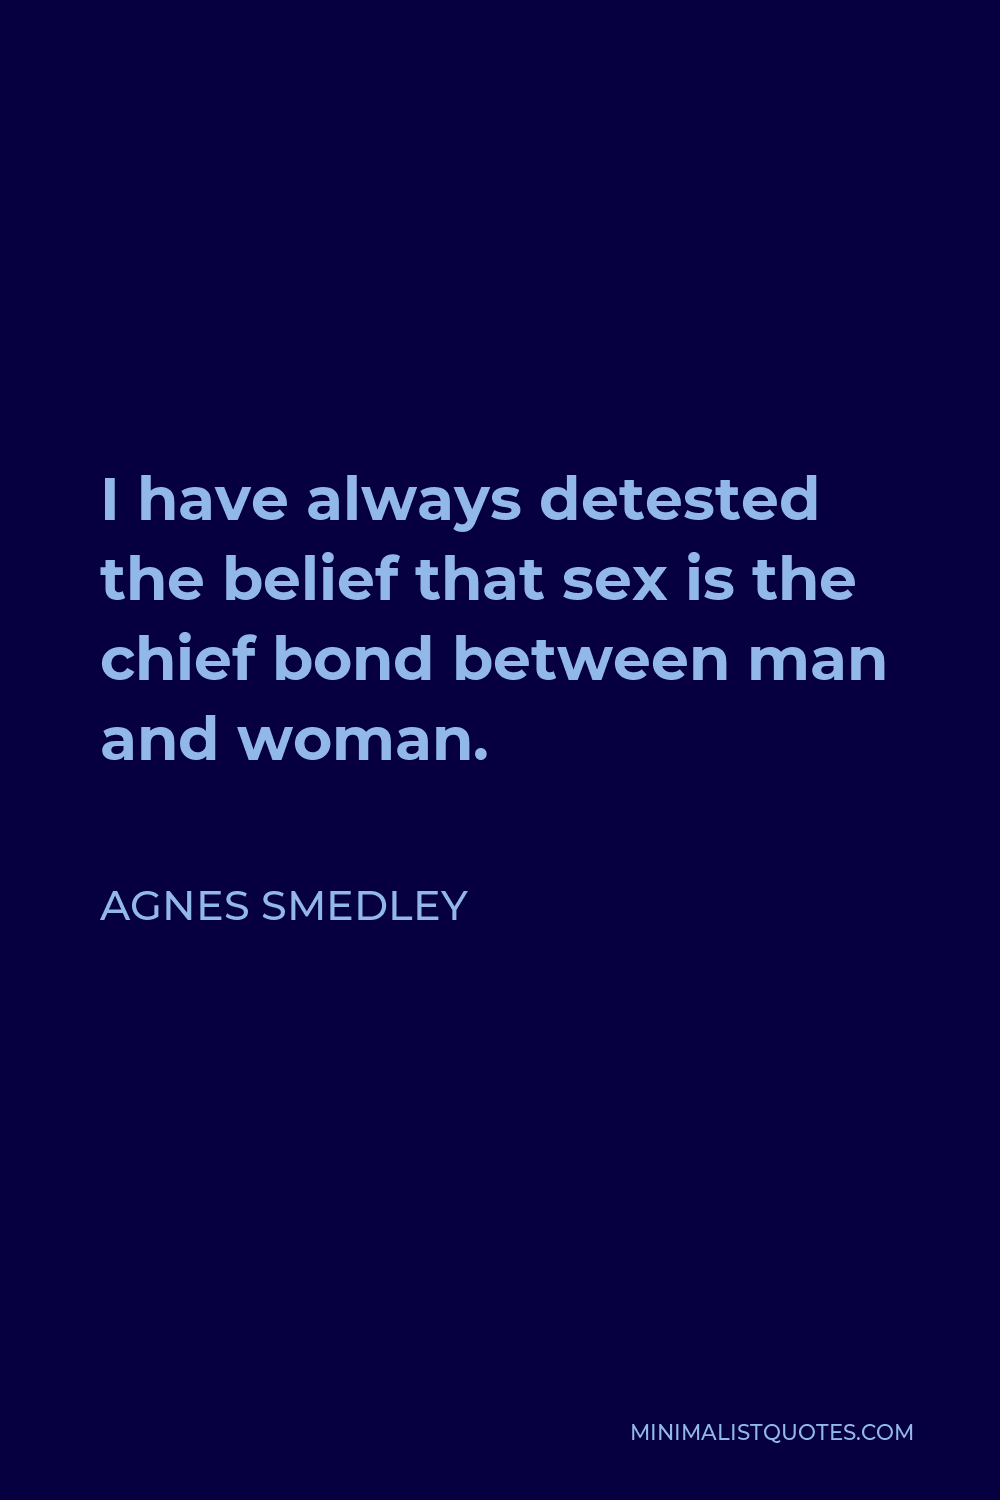 Agnes Smedley Quote - I have always detested the belief that sex is the chief bond between man and woman.